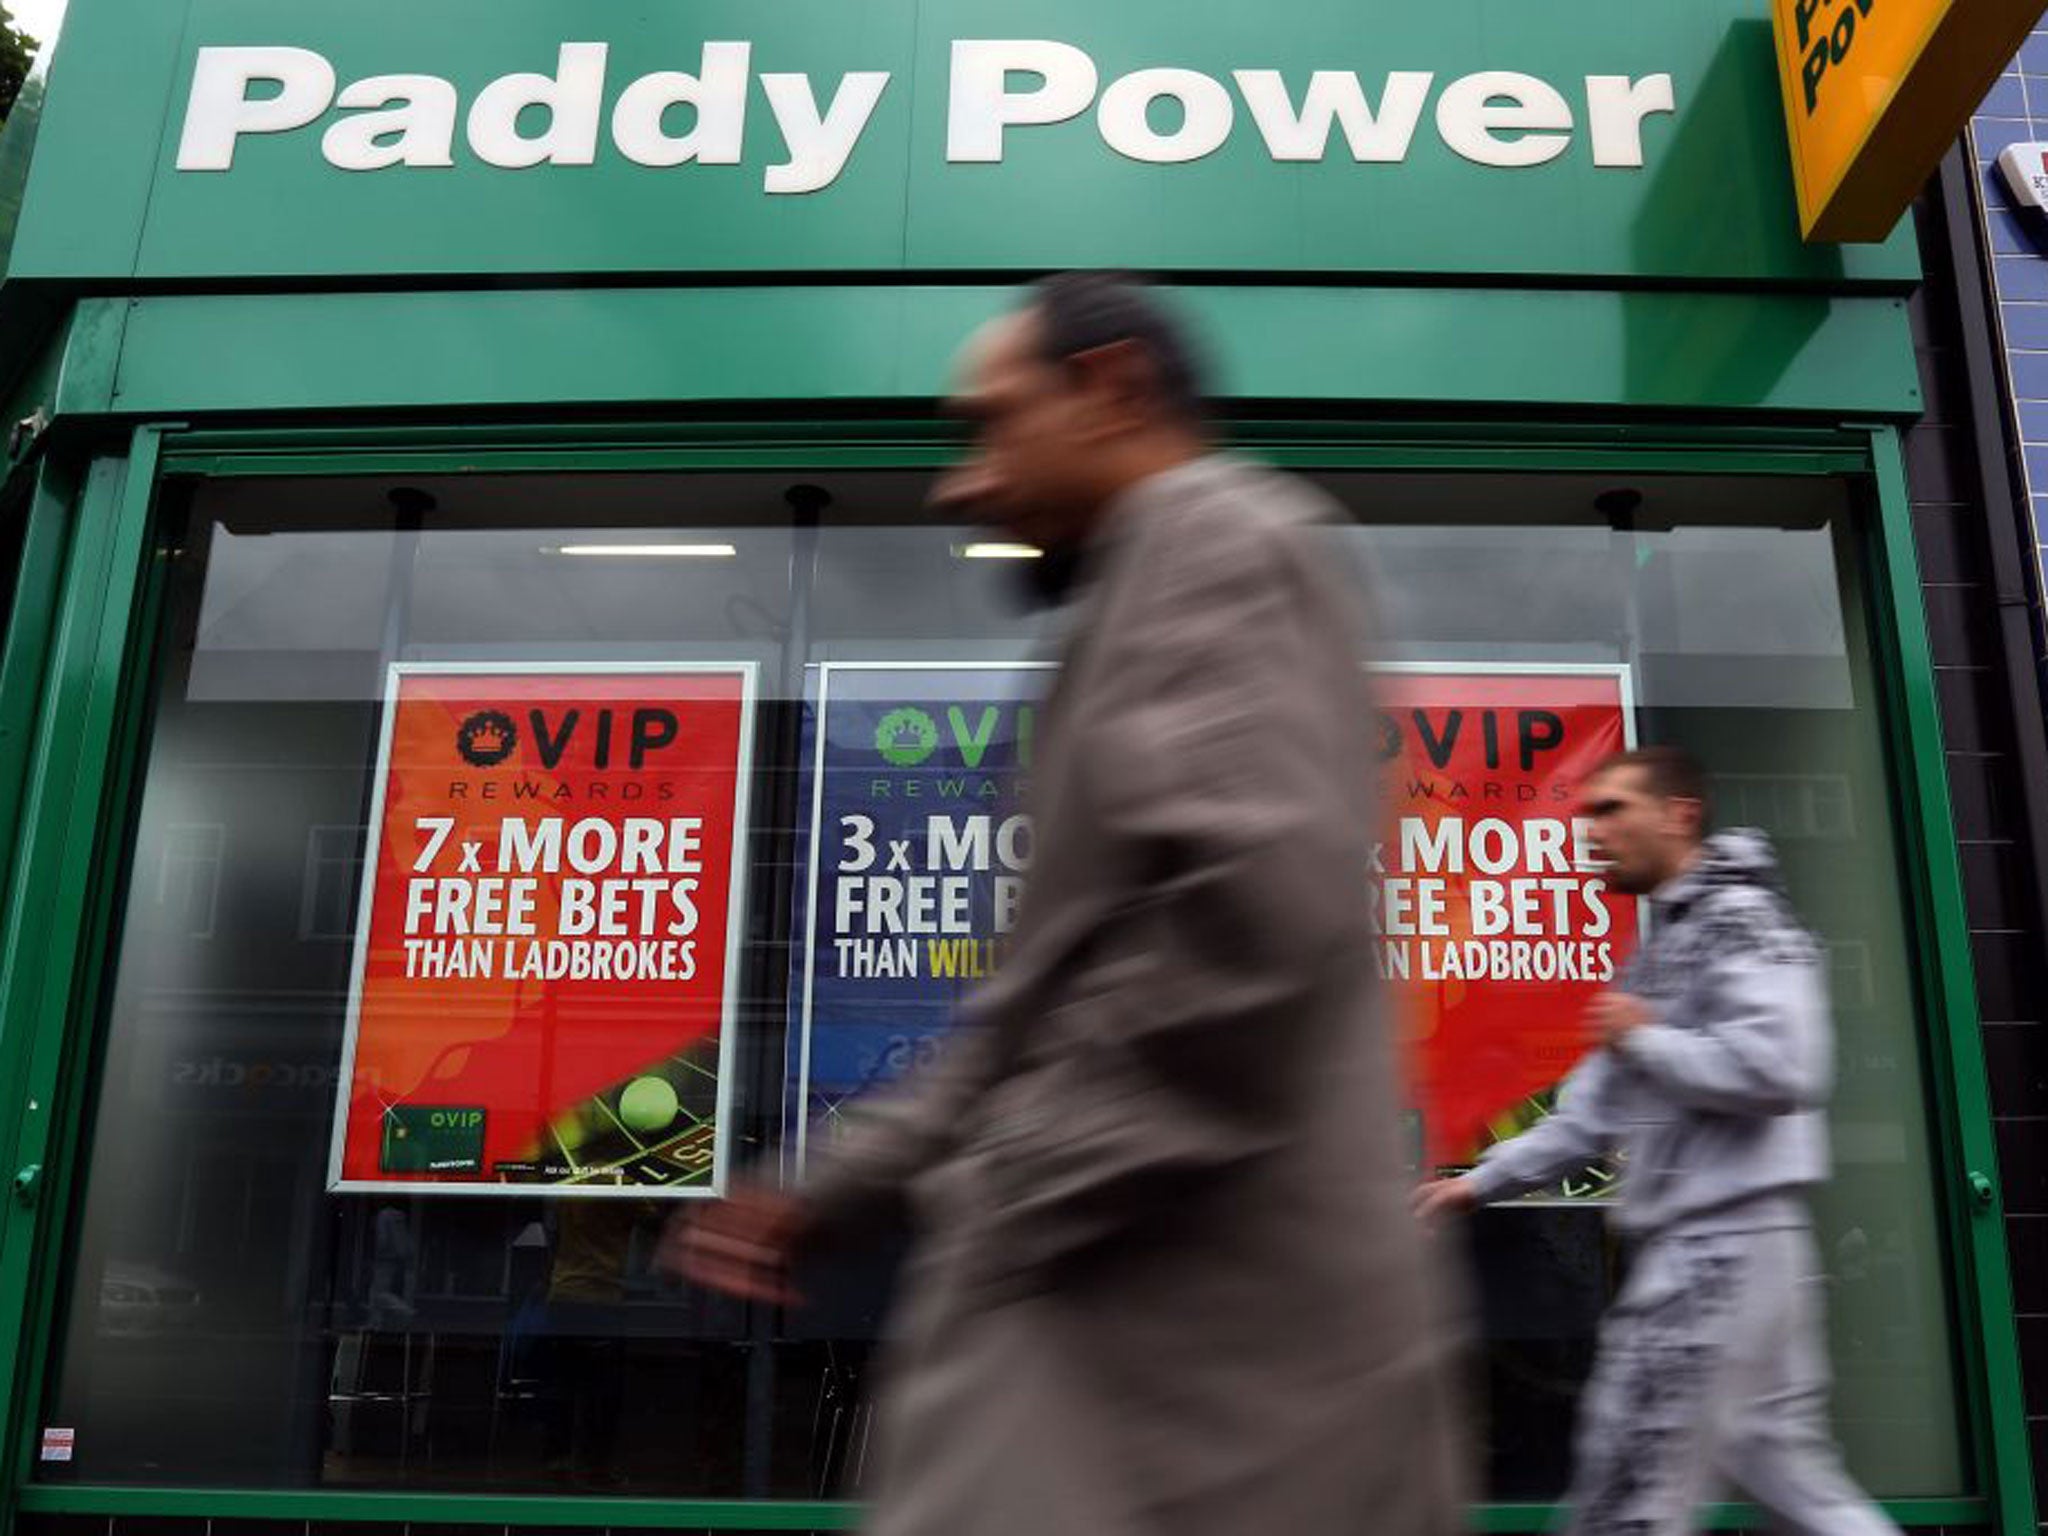 61 per cent of Paddy Power’s 327 betting shops are located in areas with above average levels of non-UK born population